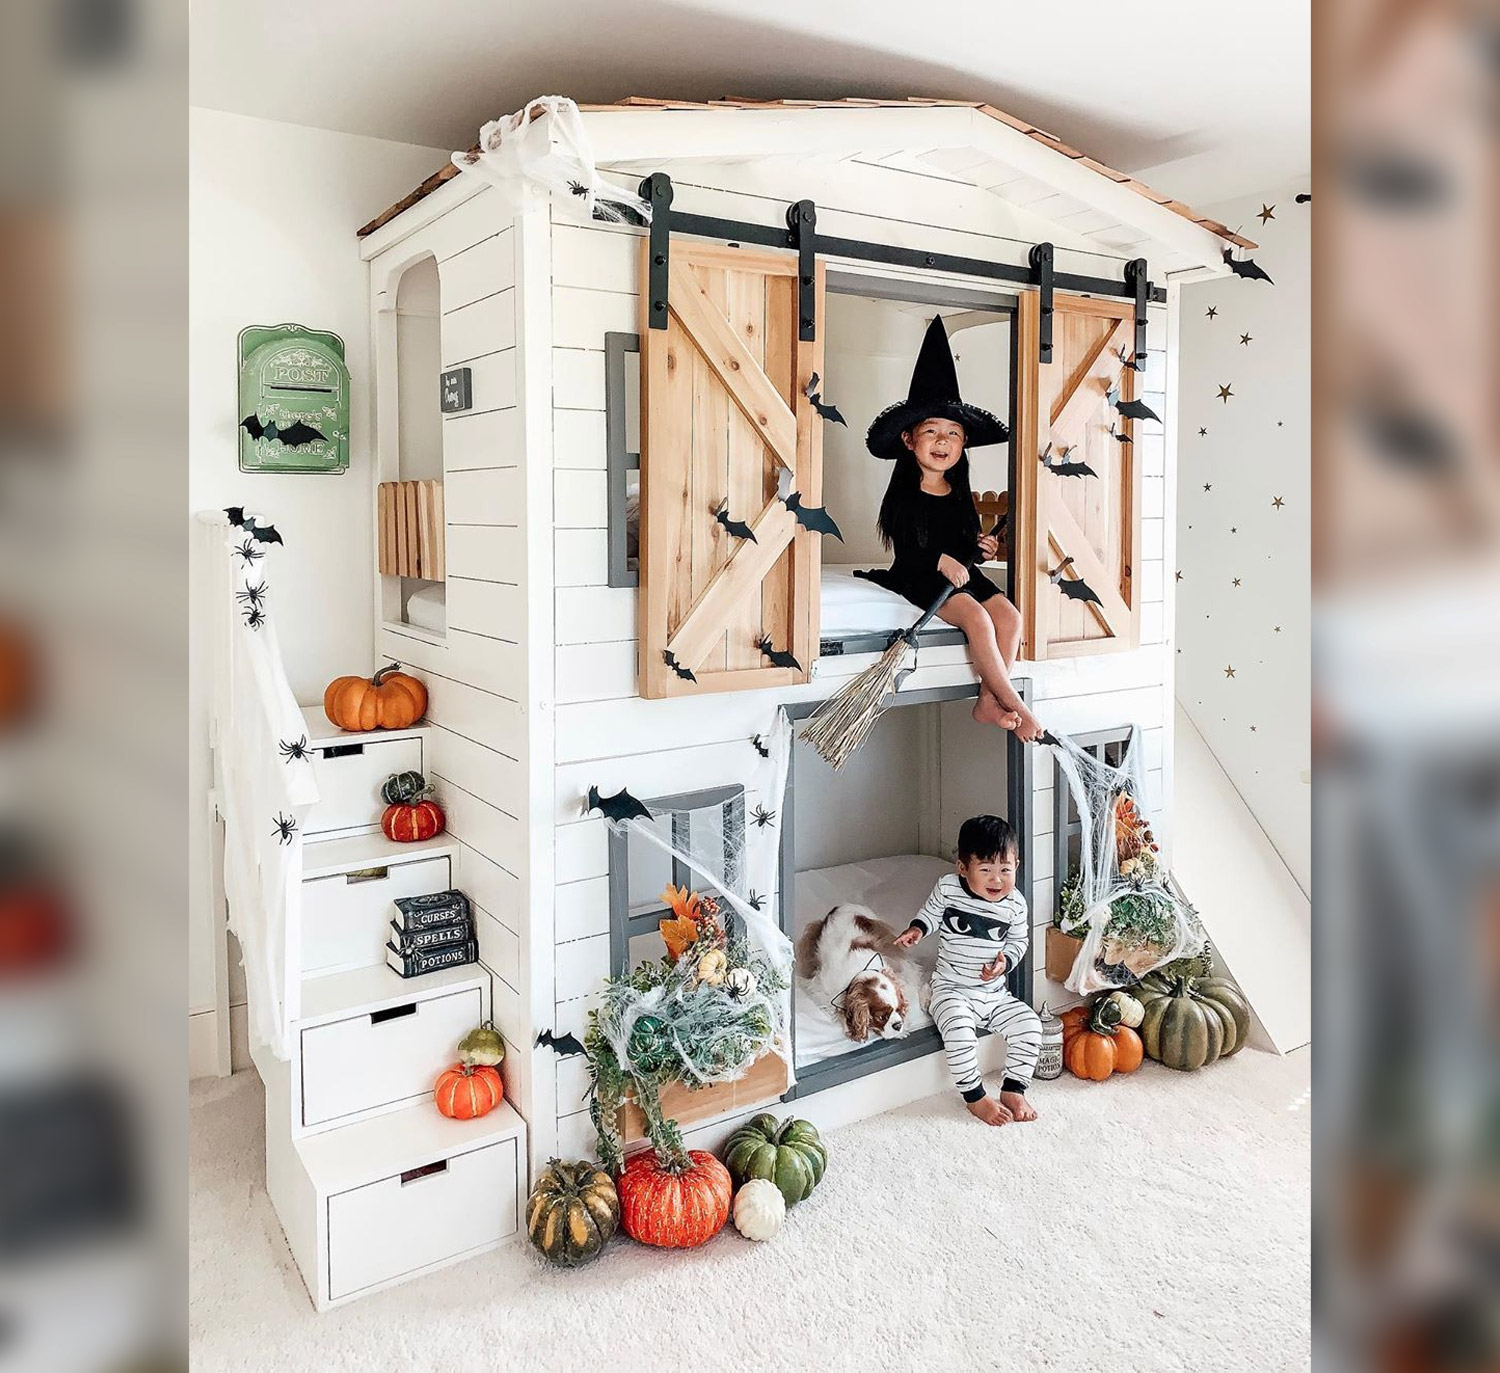 This Diy Farmhouse Bunk Bed Is The Most, Diy Girl Bunk Beds